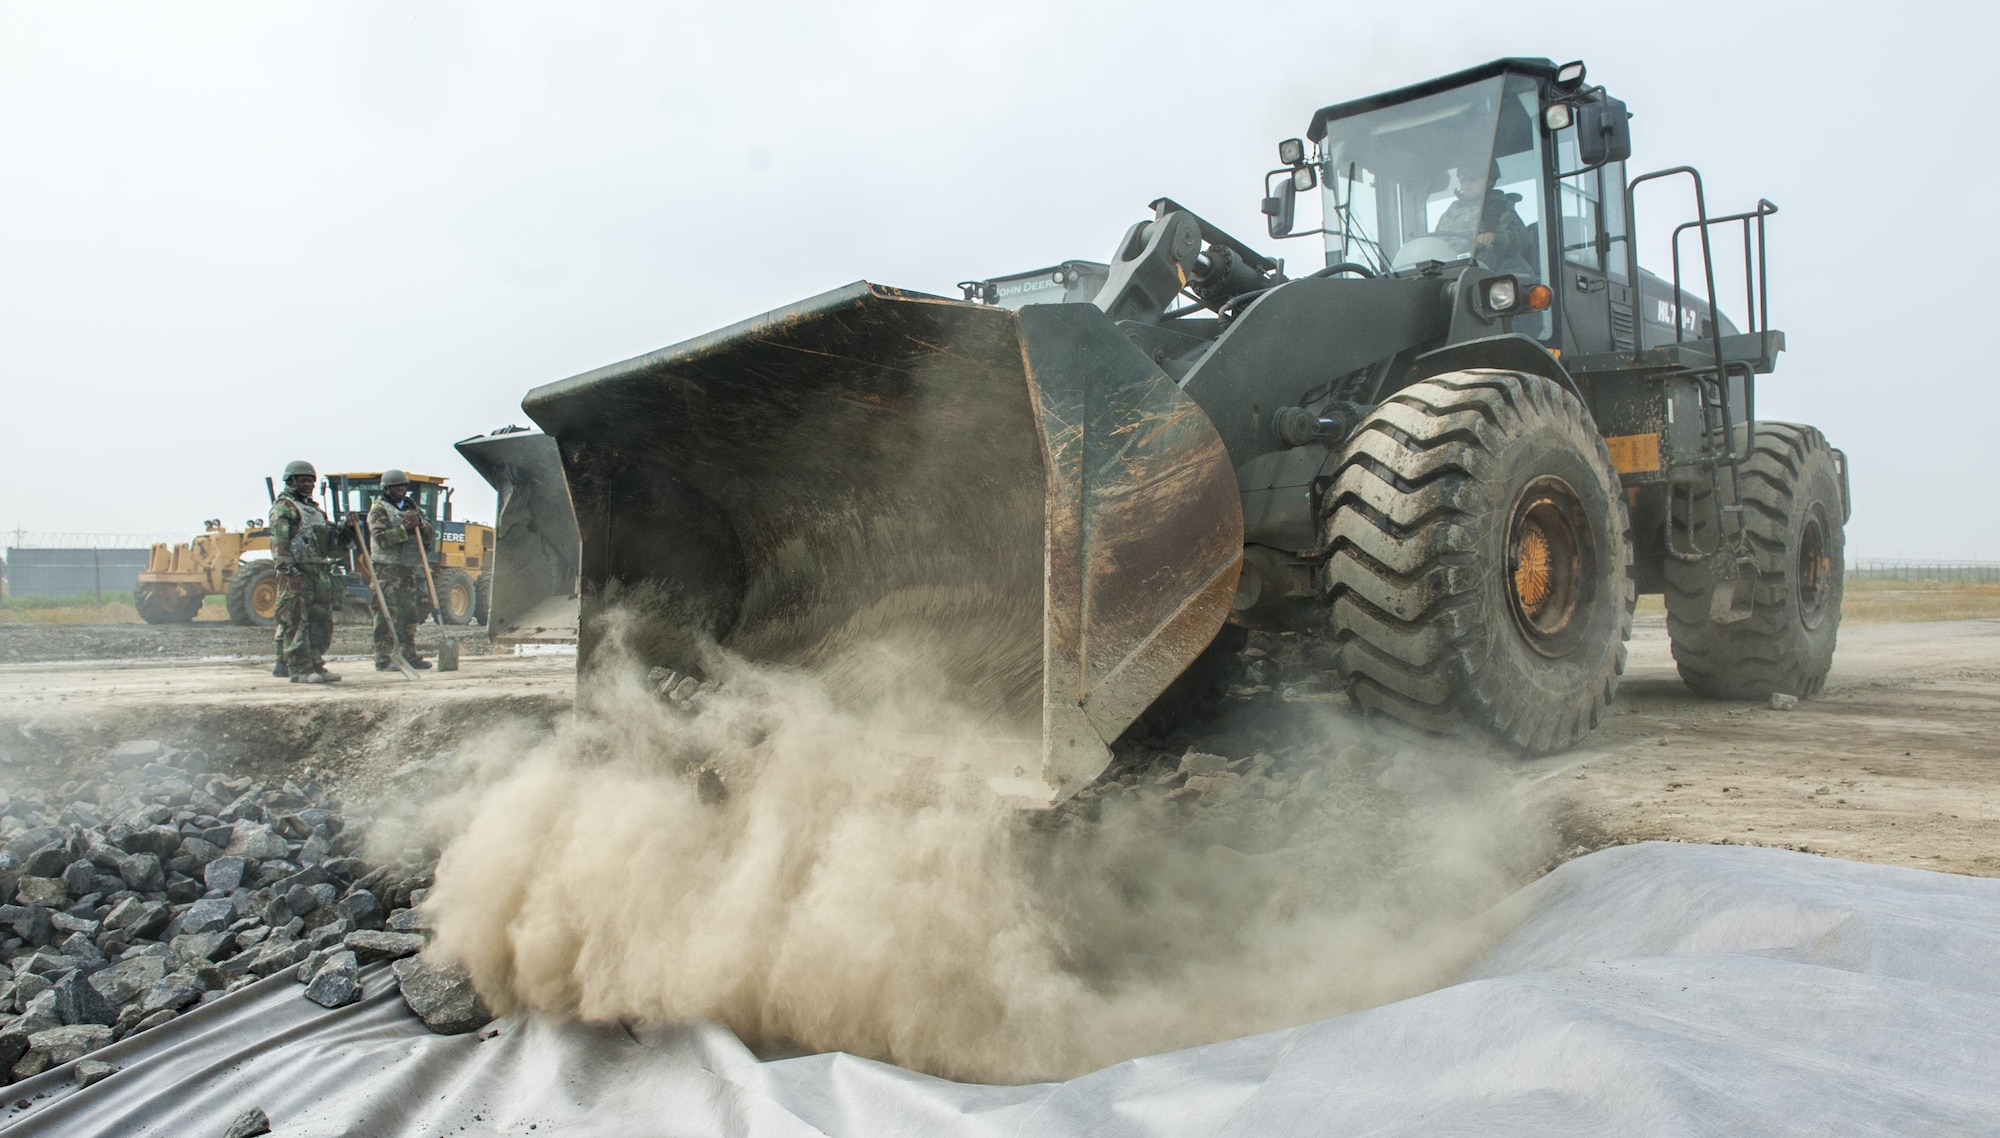 U.S. Air Force Airmen assigned to the 8th Civil Engineering Squadron pavement and construction section, stand by to assist a loader as it unloads rocks into a crater June 29, 2017, at Kunsan Air Base, Republic of Korea. The crater simulated runway battle damage, preventing aircraft takeoff. CES airmen were tasked to repair the damage as quickly as possible during an airfield damage repair exercise. (U.S. Air Force photo by Senior Airman Colville McFee/Released)